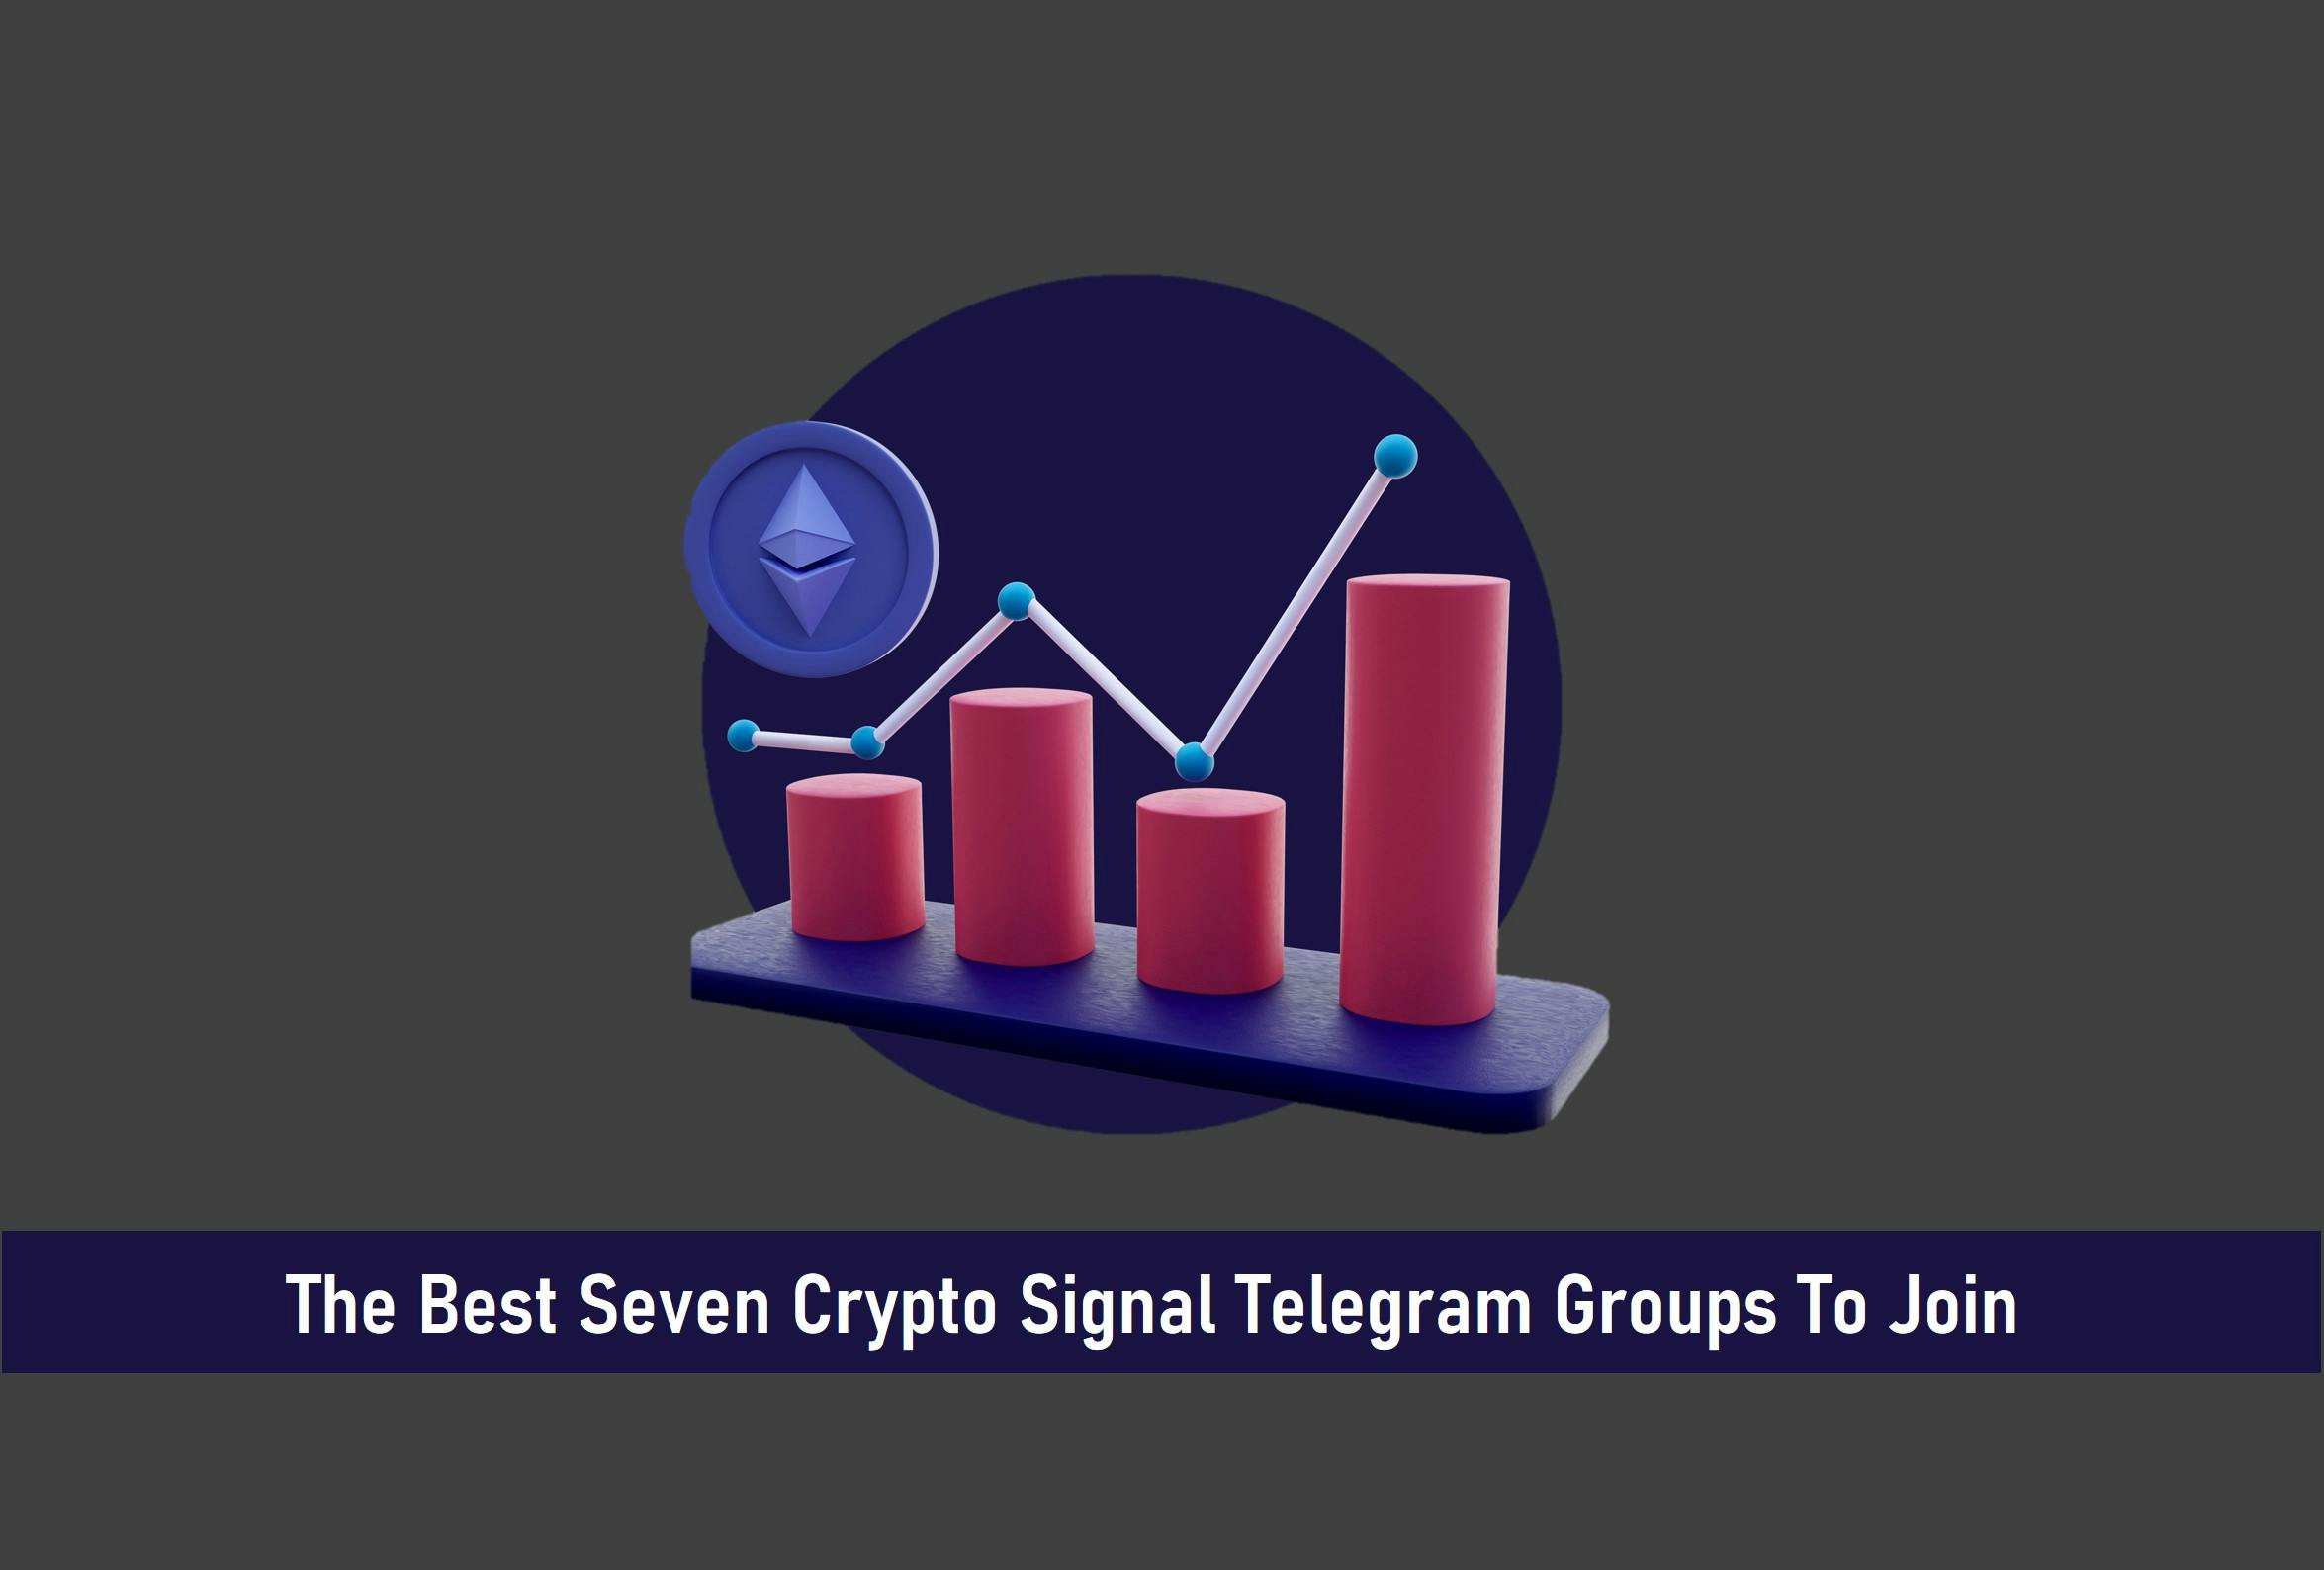 The Best Seven Crypto Signal Telegram Groups to Join